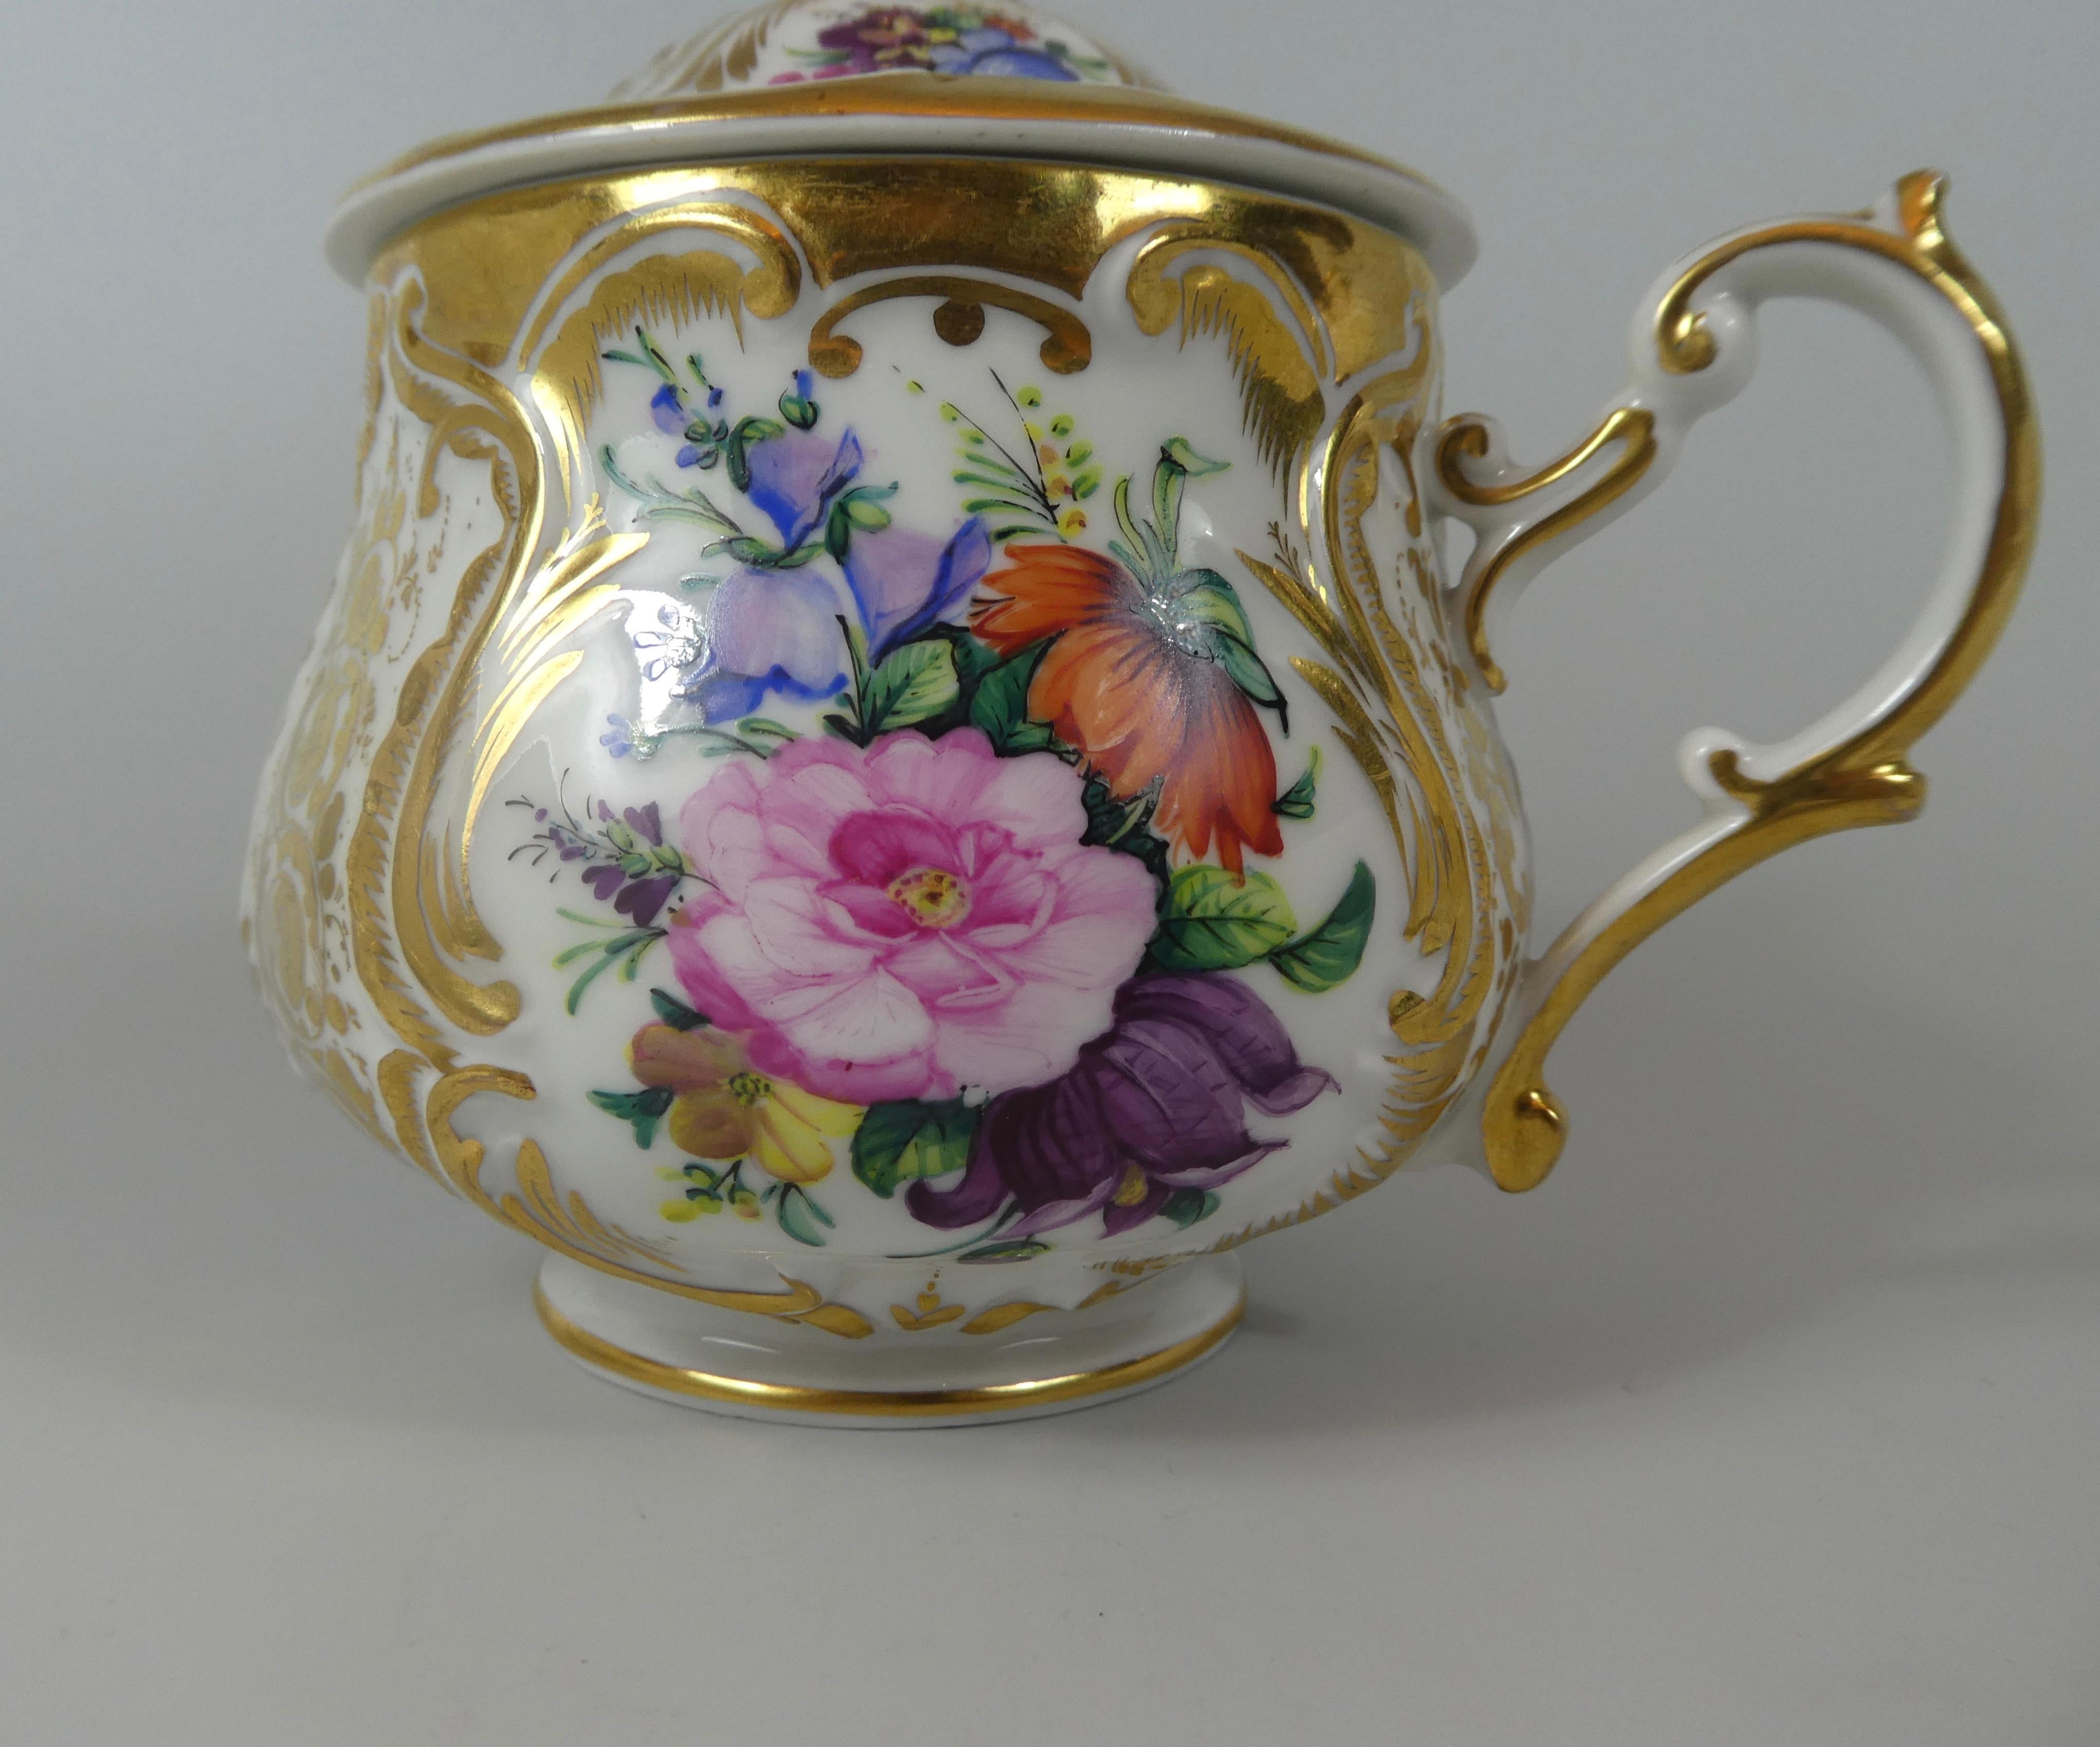 KPM Berlin Porcelain Chocolate Cup, Cover and Stand, circa 1860 6